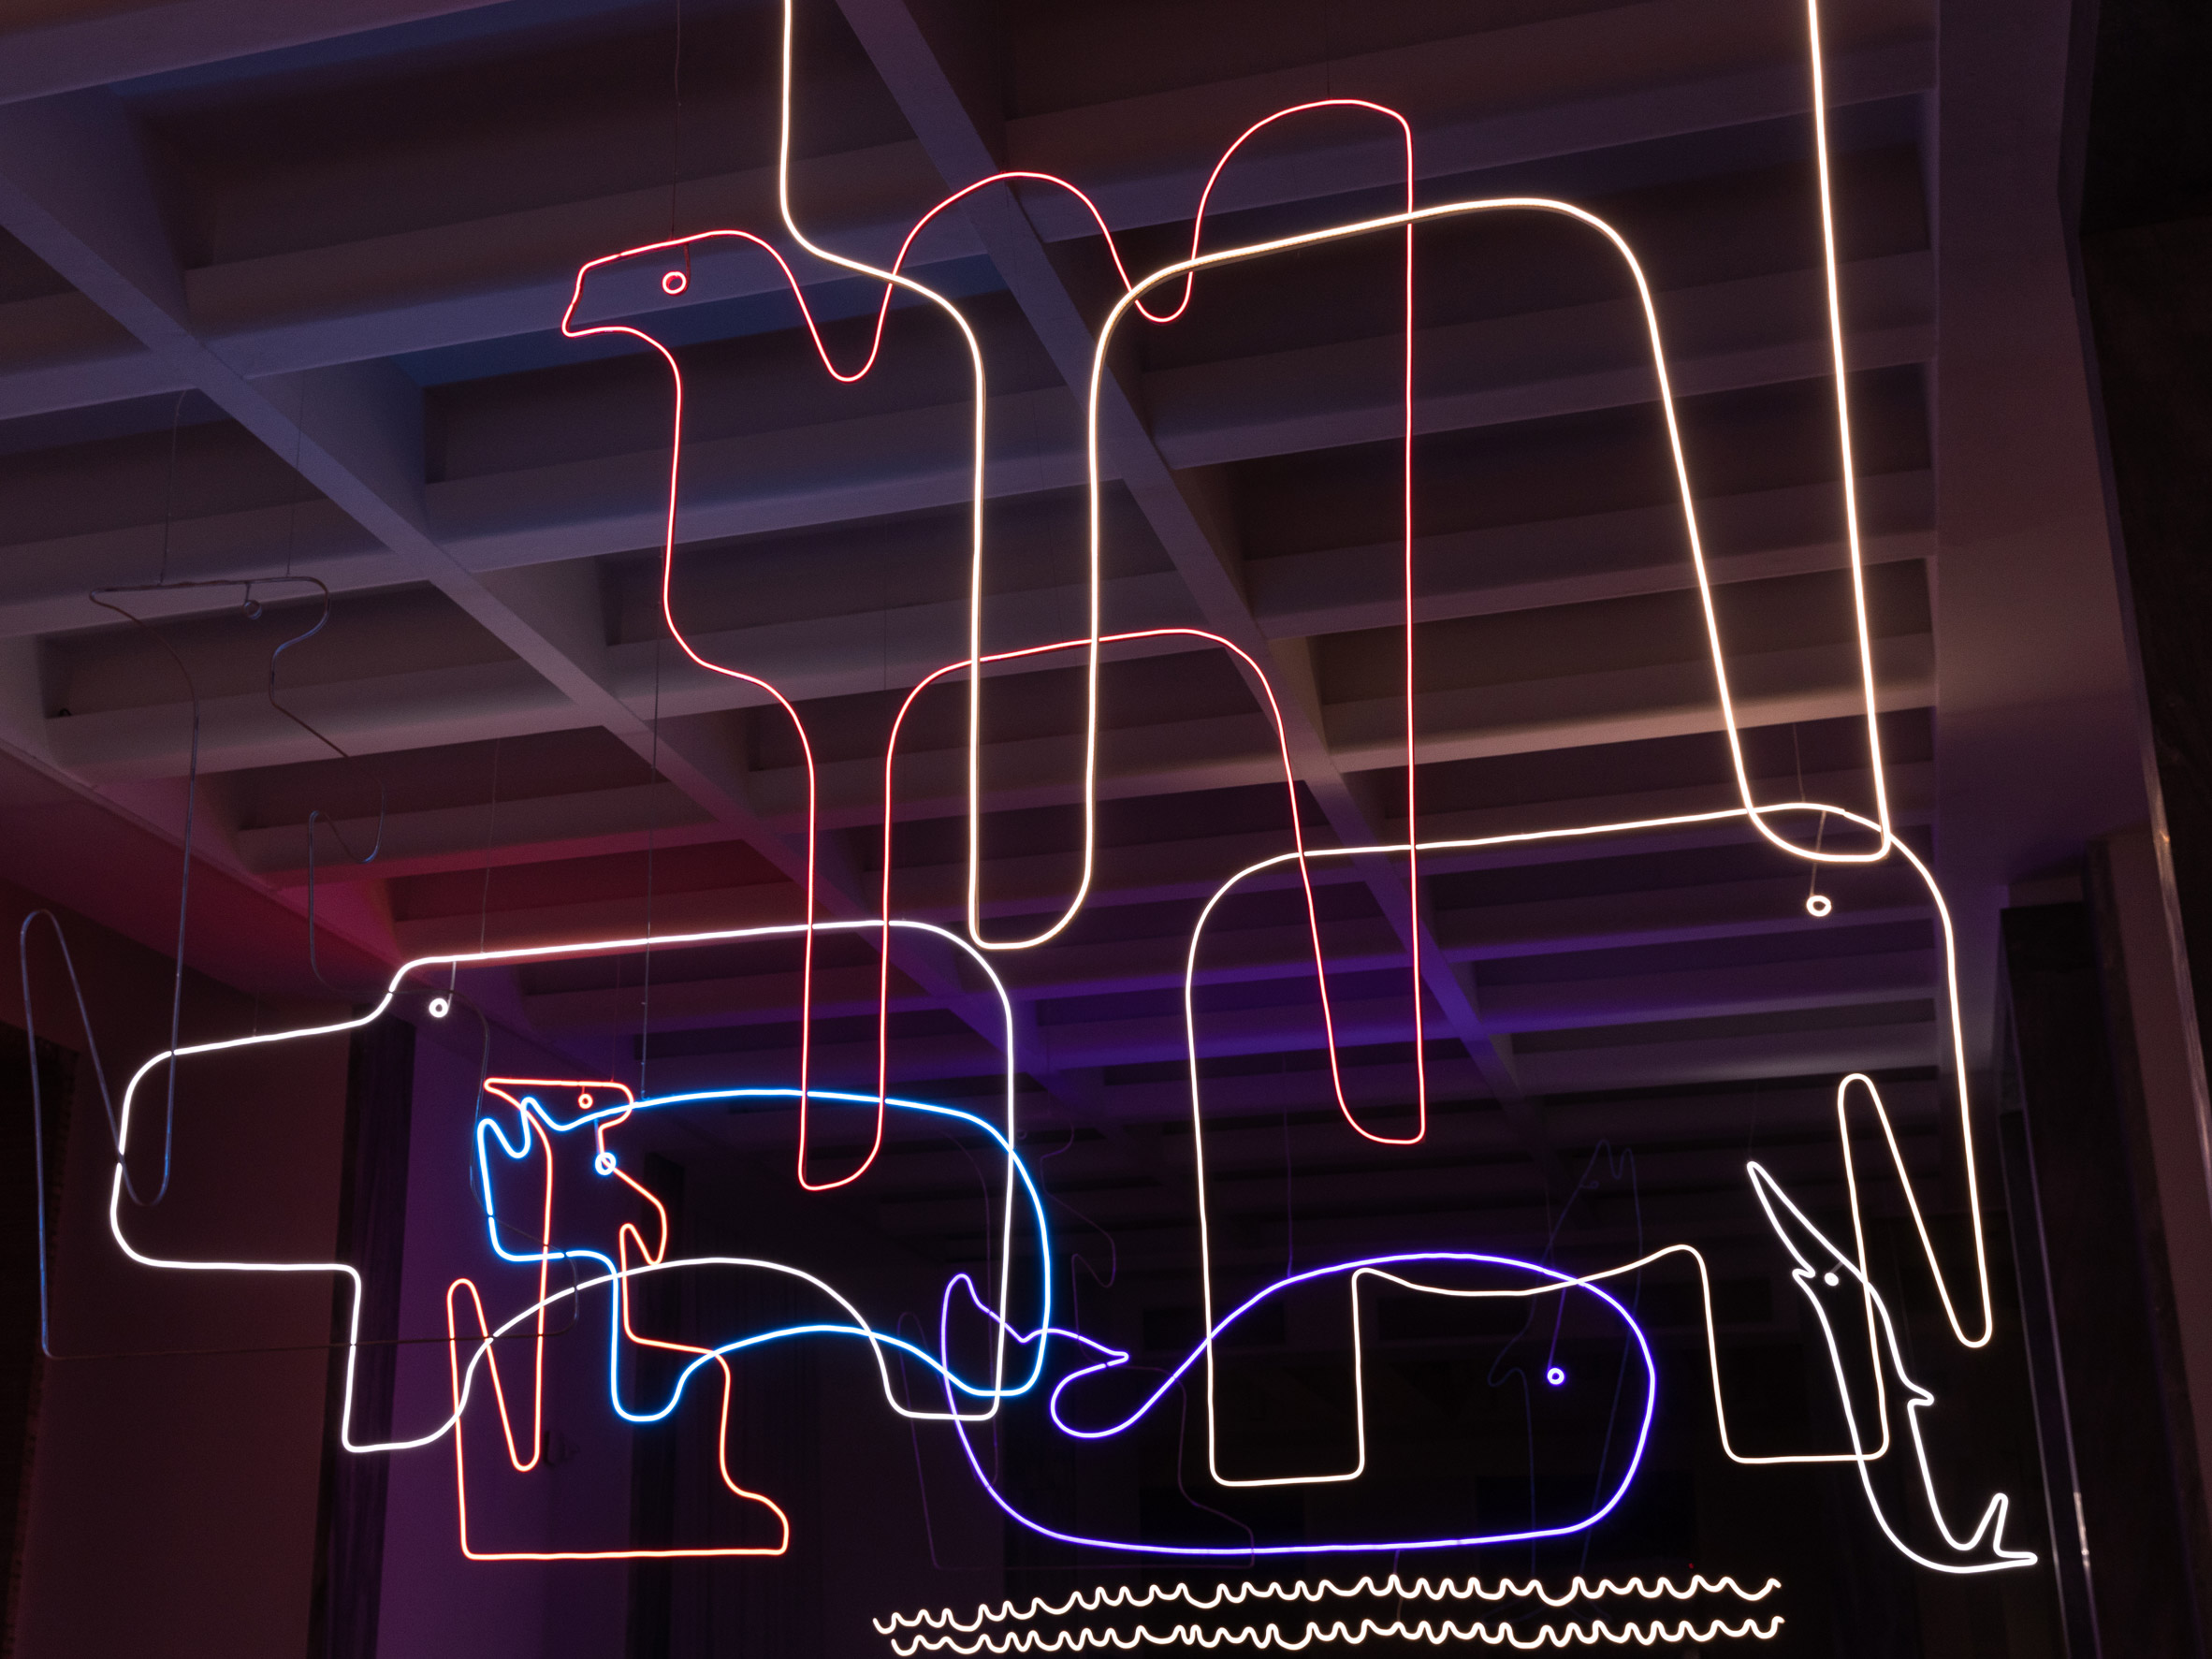 Neon outlines of animals suspended from the ceiling